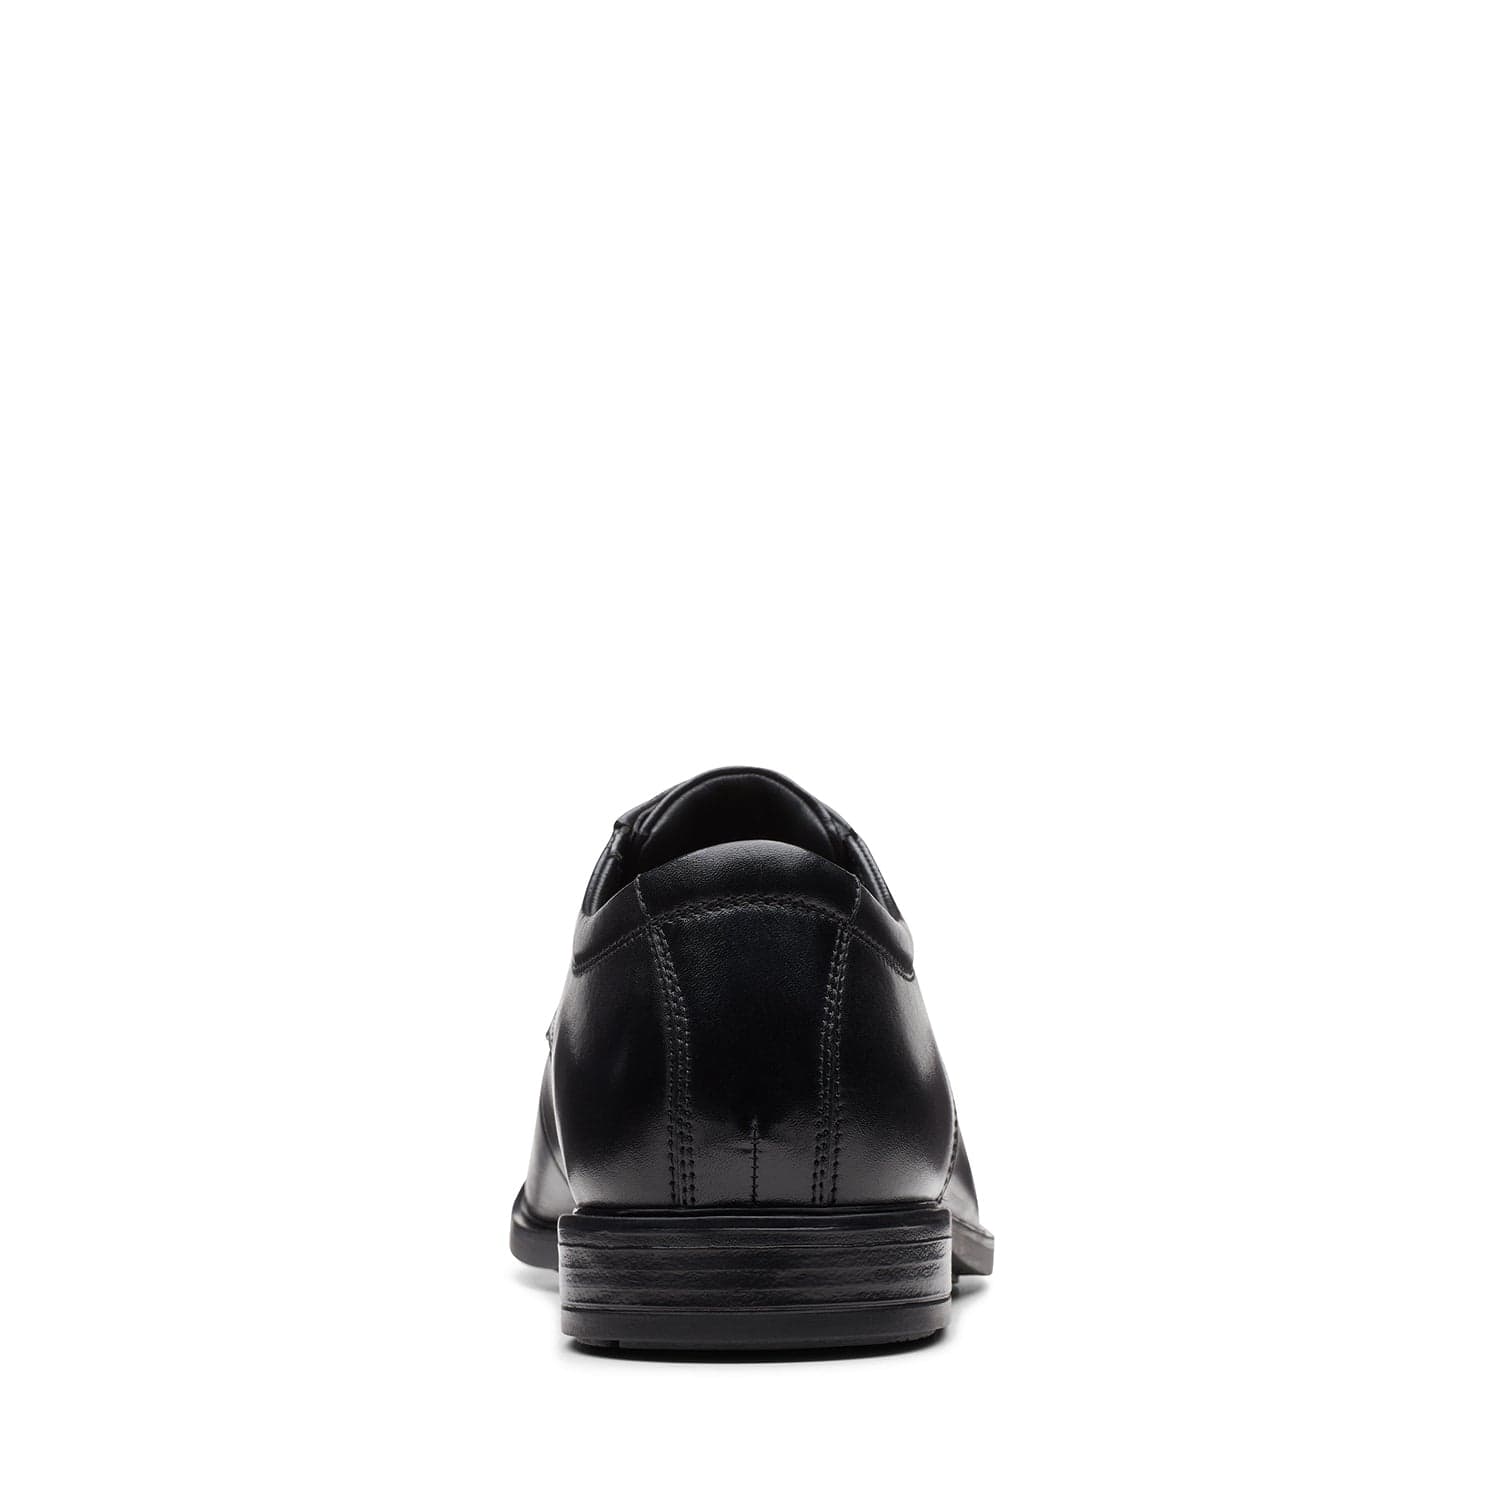 Clarks Howard Apron - Shoes - Black Leather - 261621778 - H Width (Wide Fit)